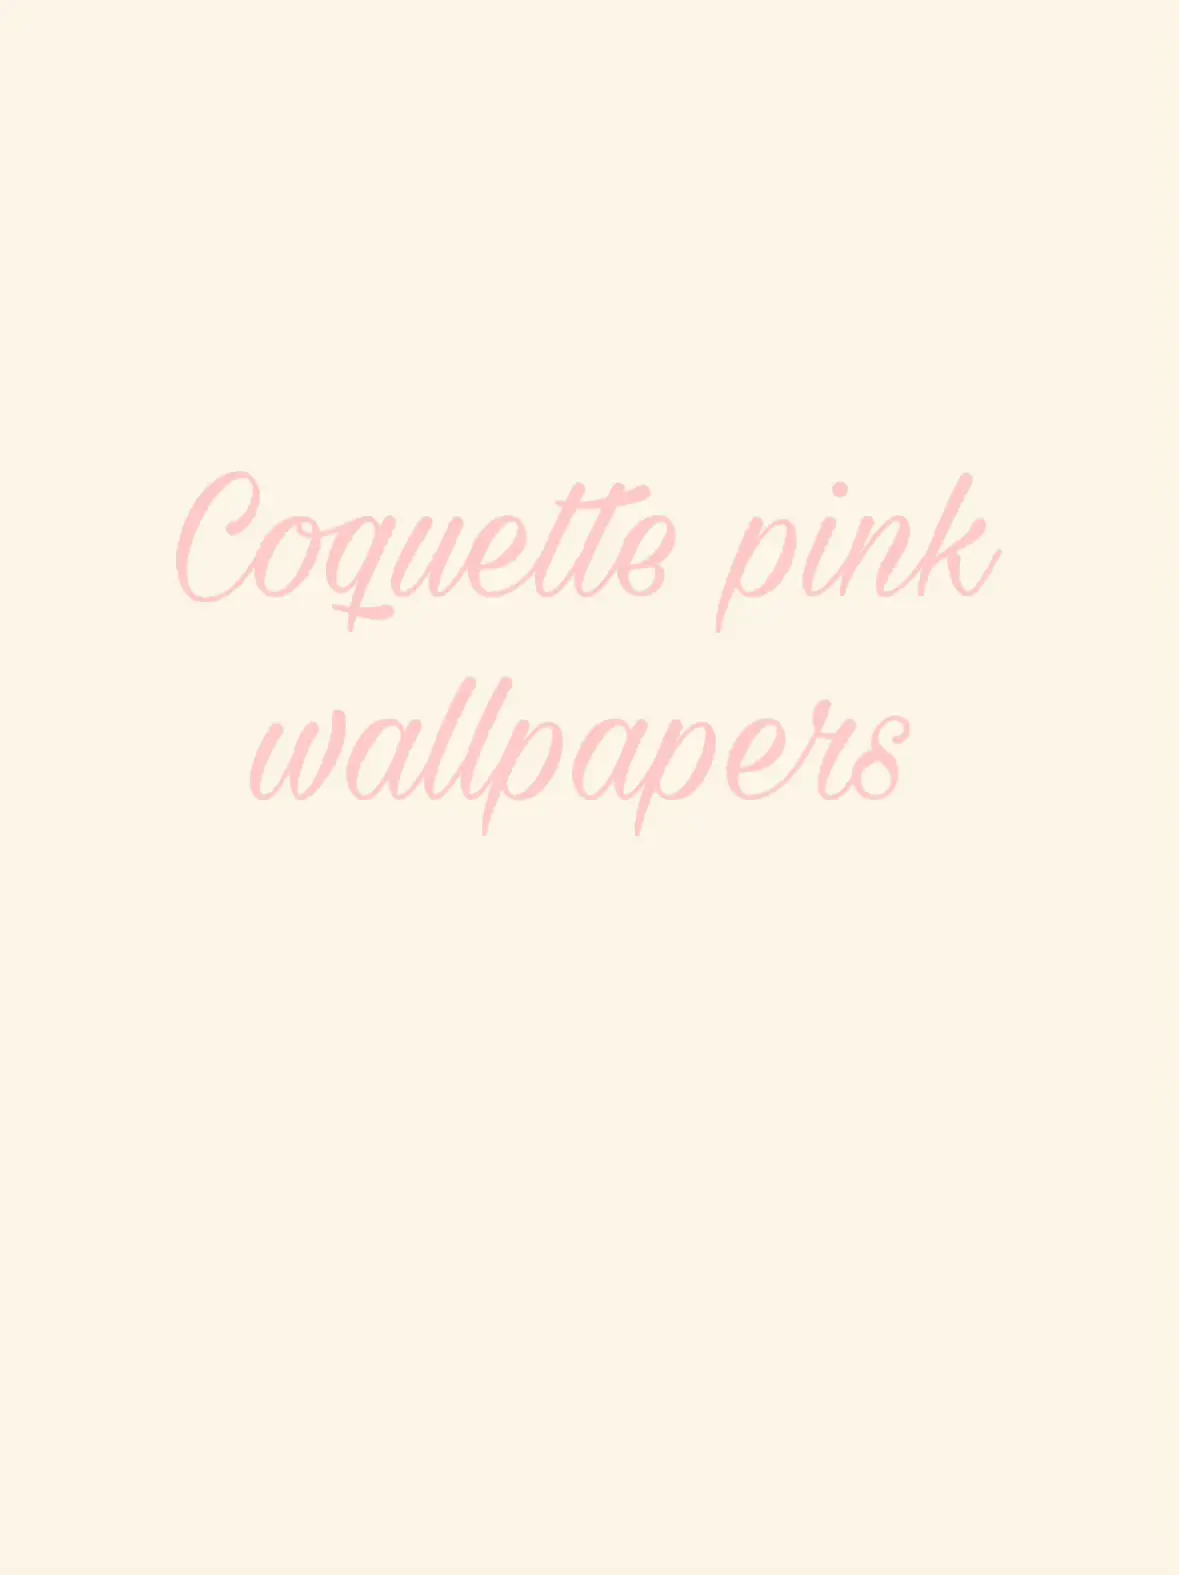 Download Coquette wallpapers for mobile phone, free Coquette HD pictures